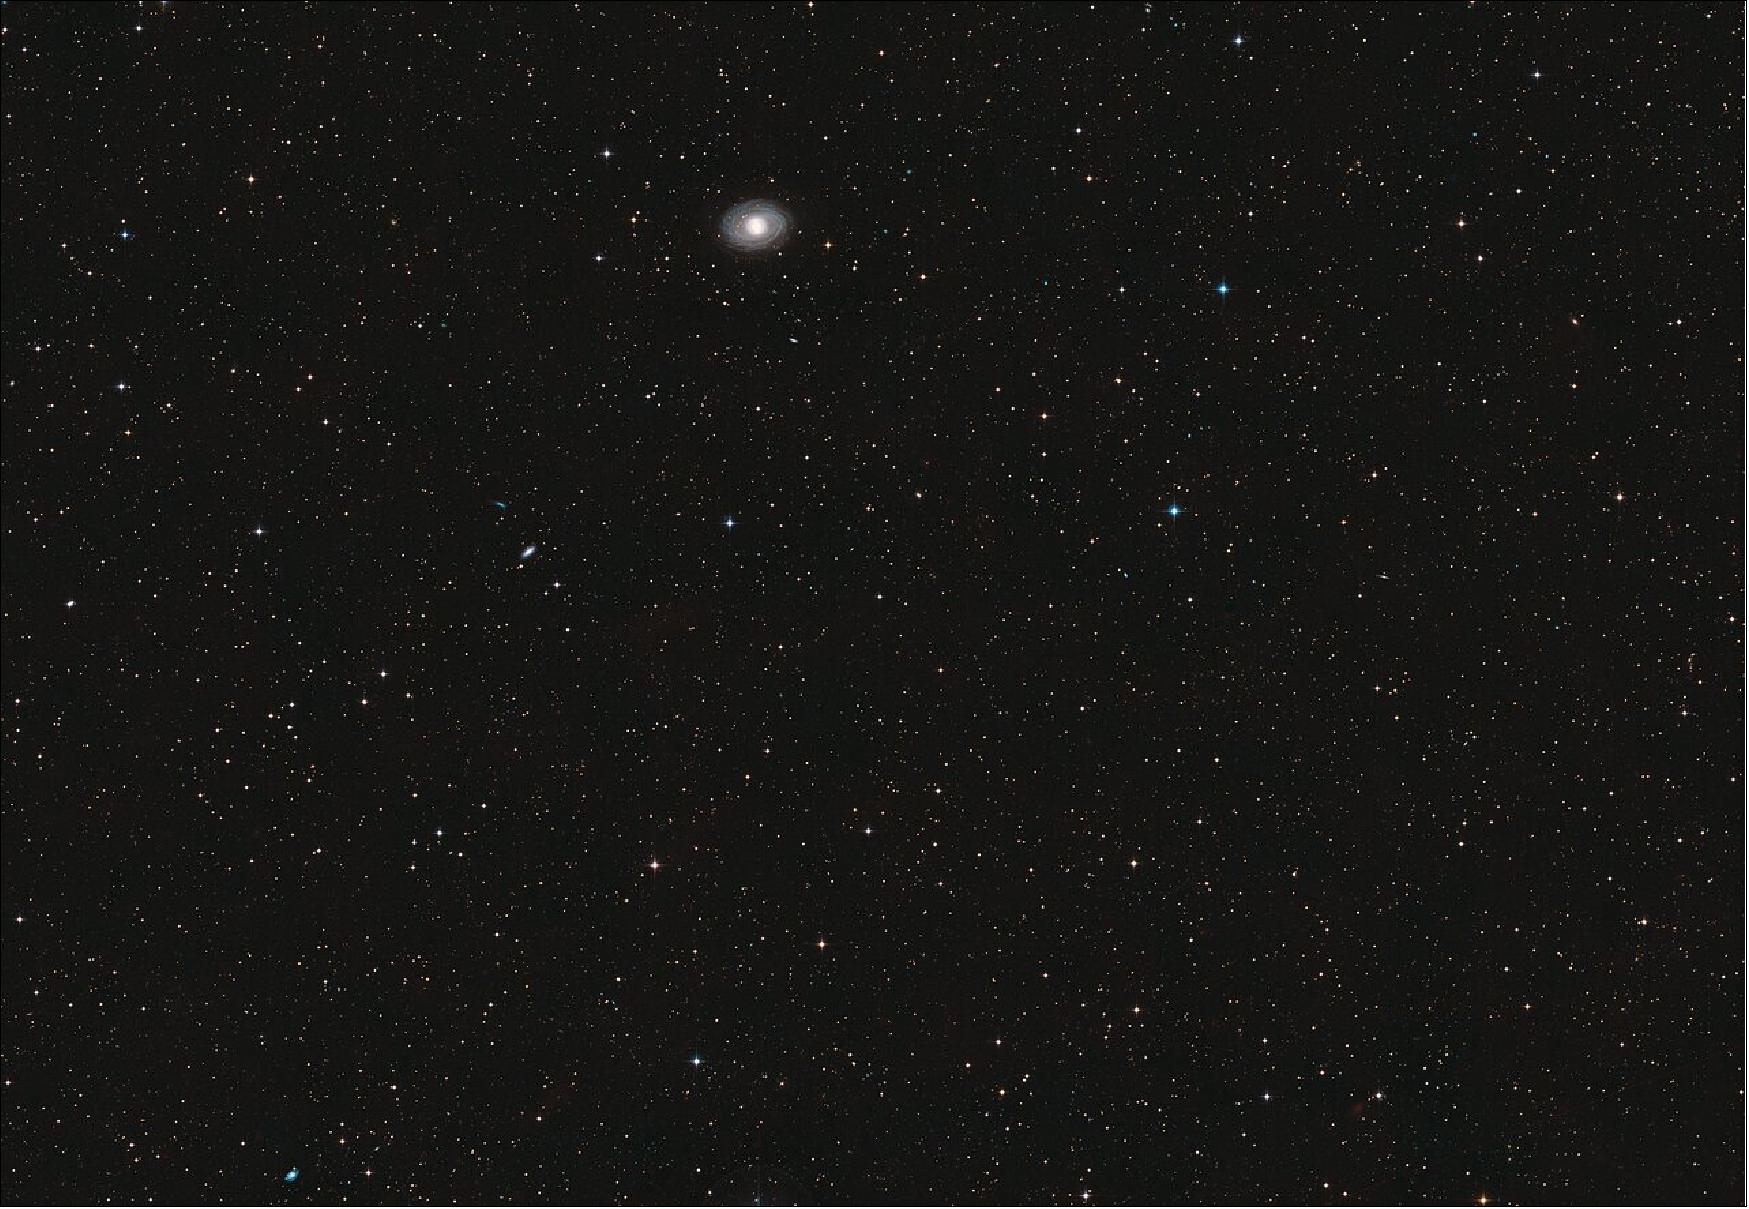 Figure 9: This image shows a ground-based wide-field view of the region around GRB 190114C from the Digitized Sky Survey 2 (image credit: ESA/Digitized Sky Survey 2. Acknowledgement: Davide De Martin)